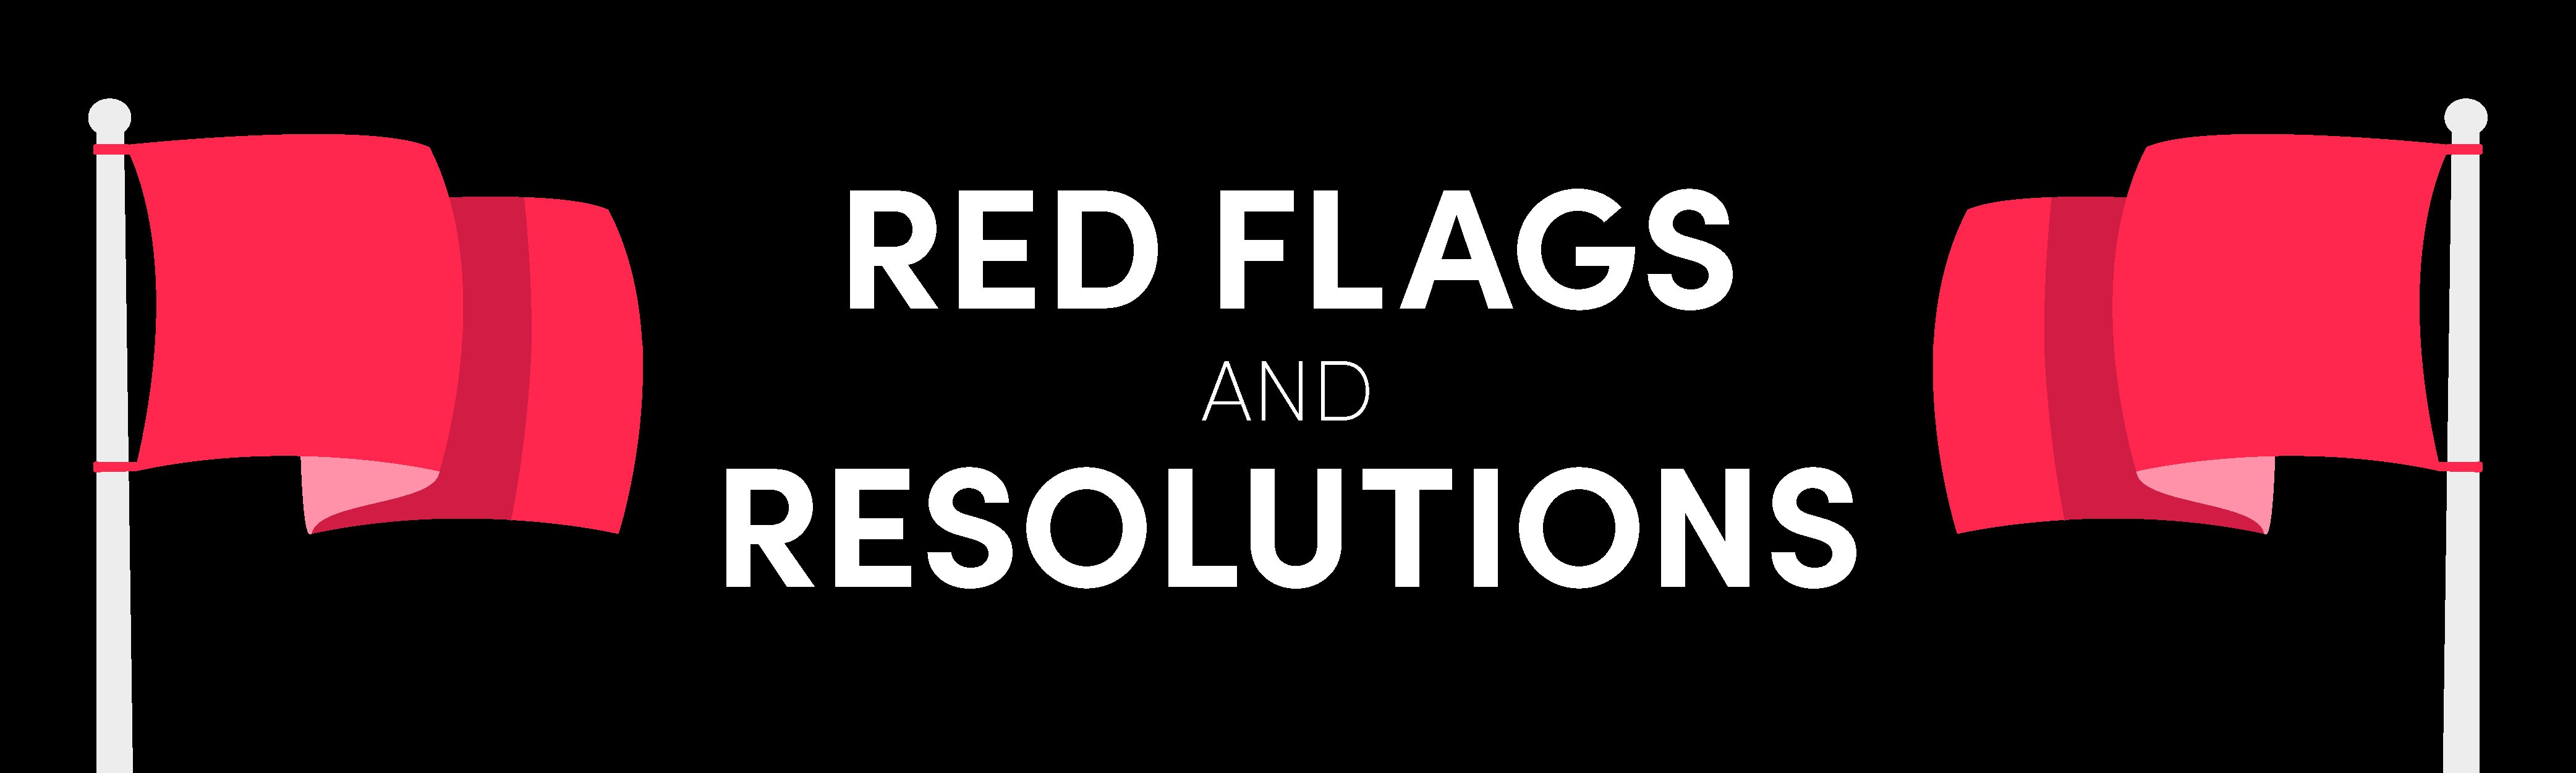 Red Flags and Resolutions | Lovehoney UK